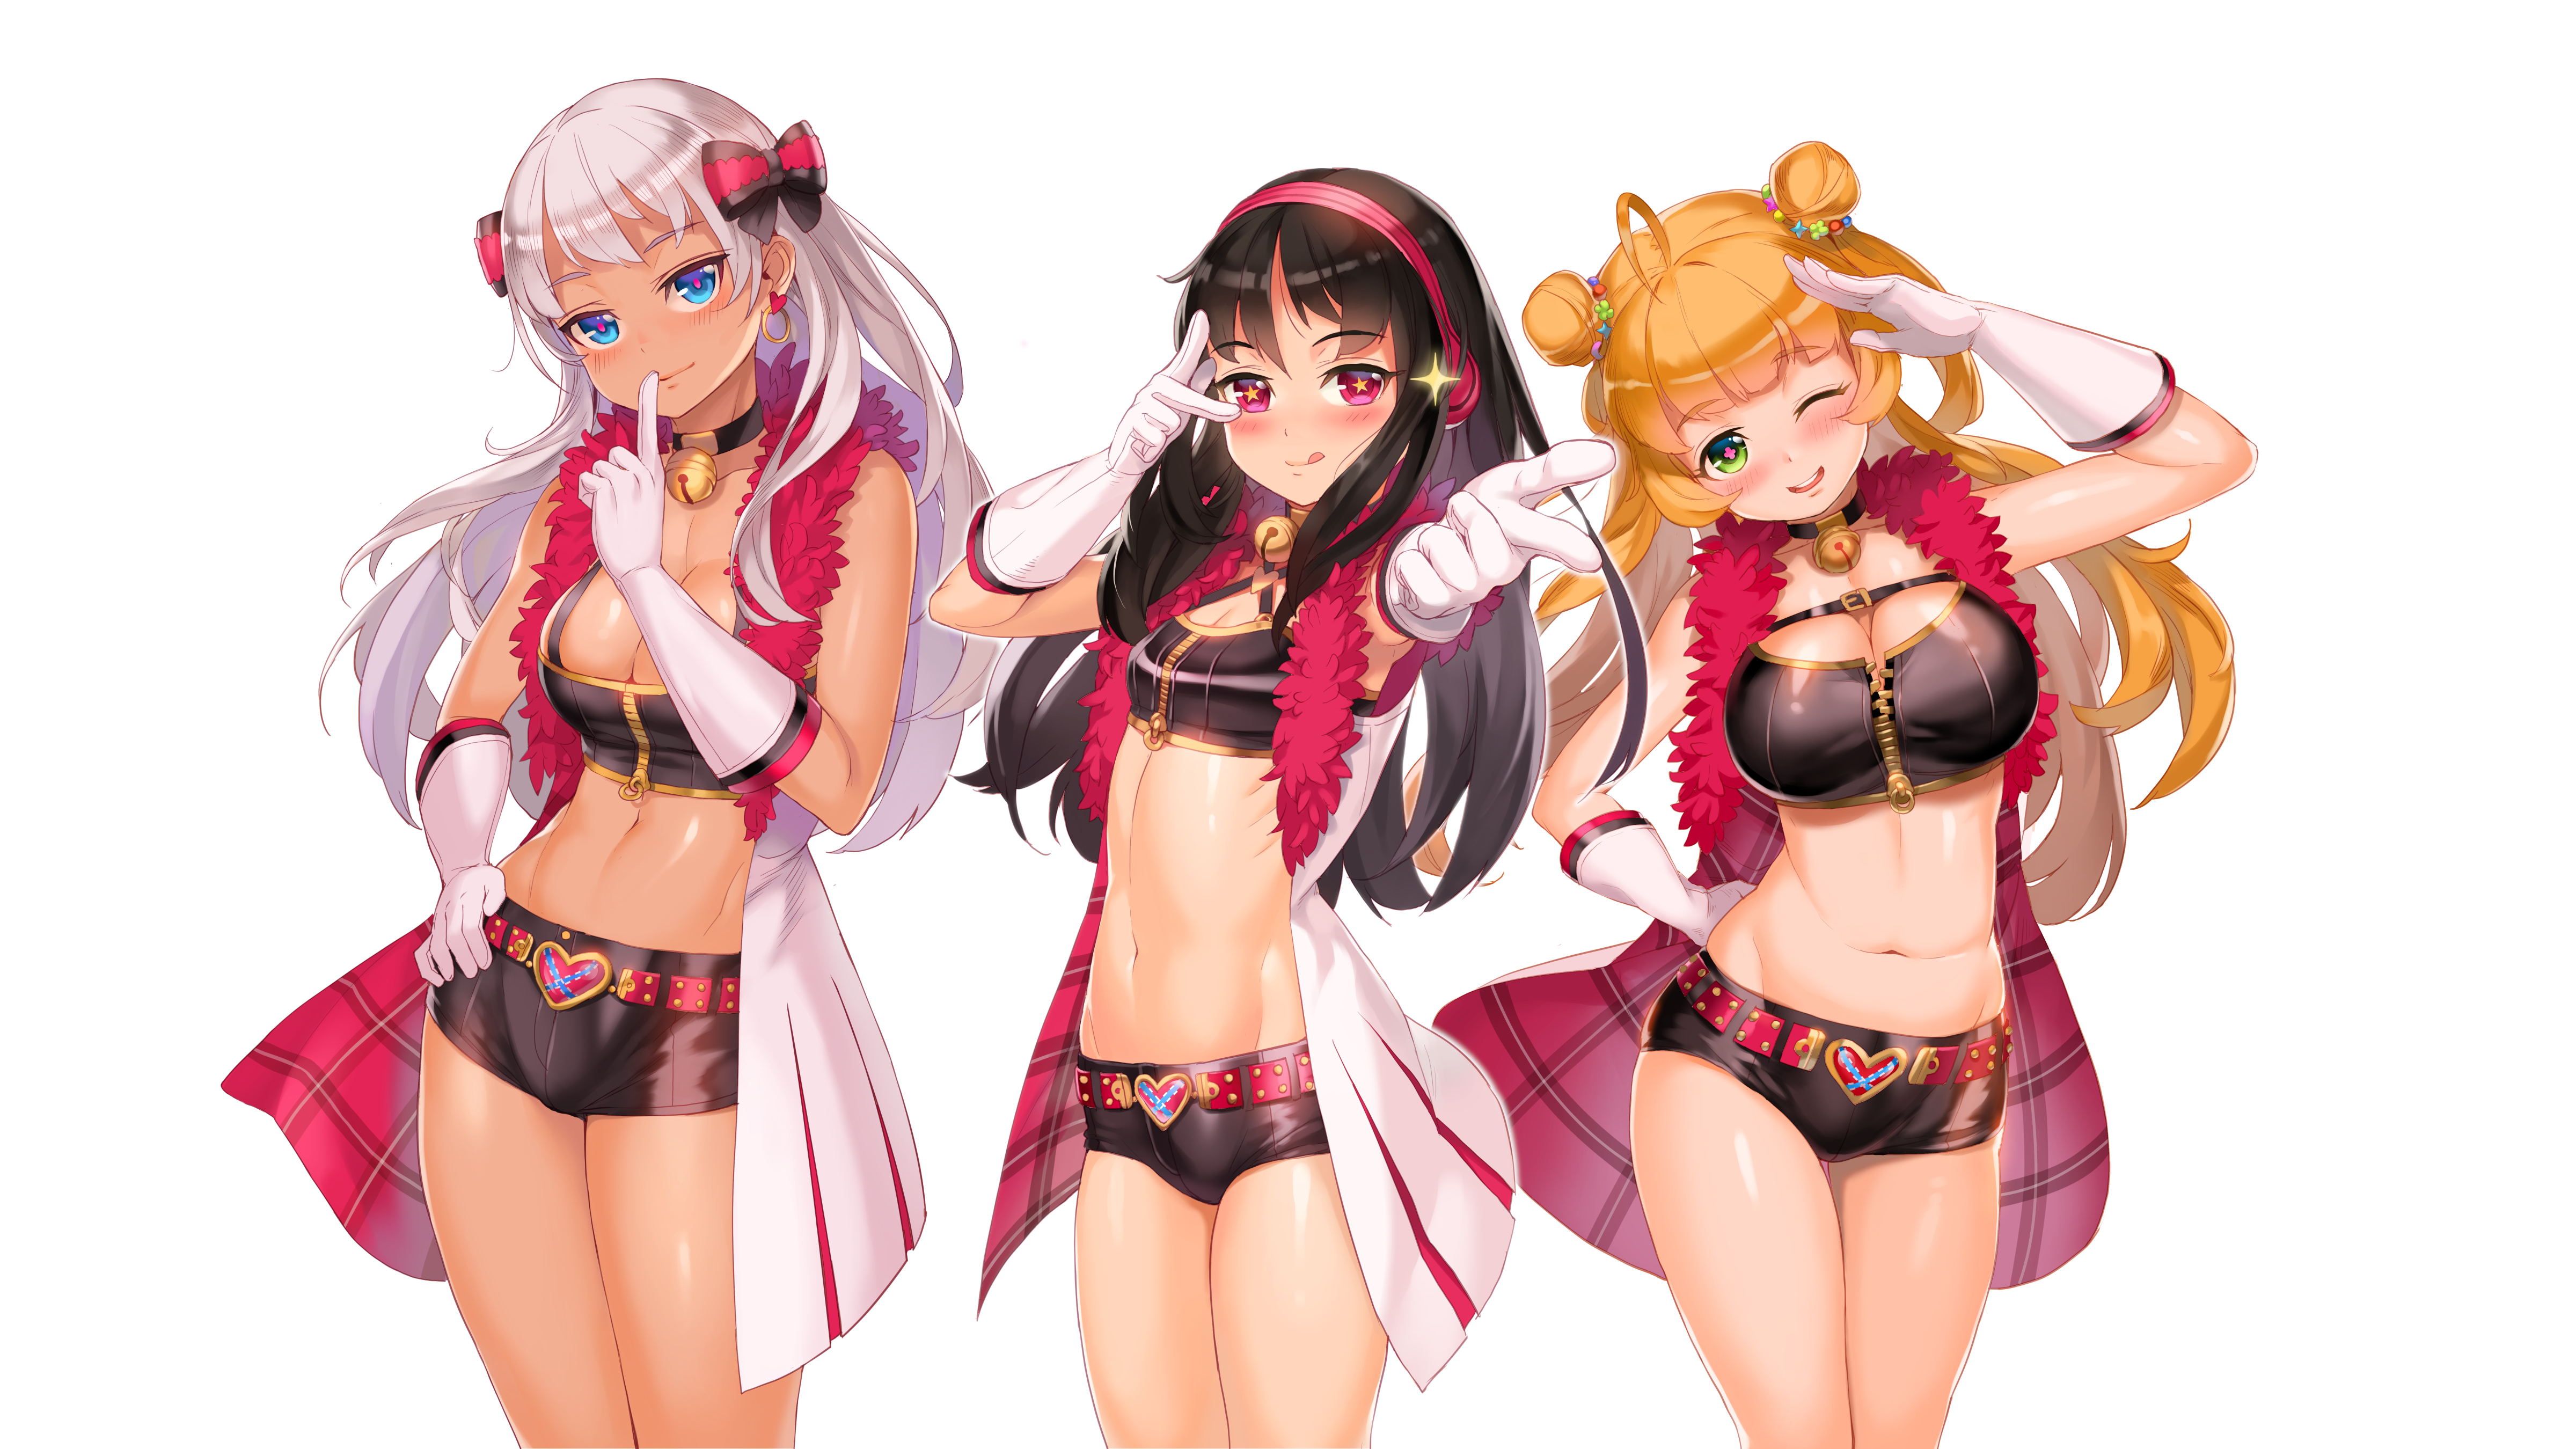 Anime 4800x2700 Xil belly Idol cleavage shorts anime star eyes thighs blonde black hair pink eyes green eyes blue eyes legs together low neckline anime girls tanned short shorts line-up